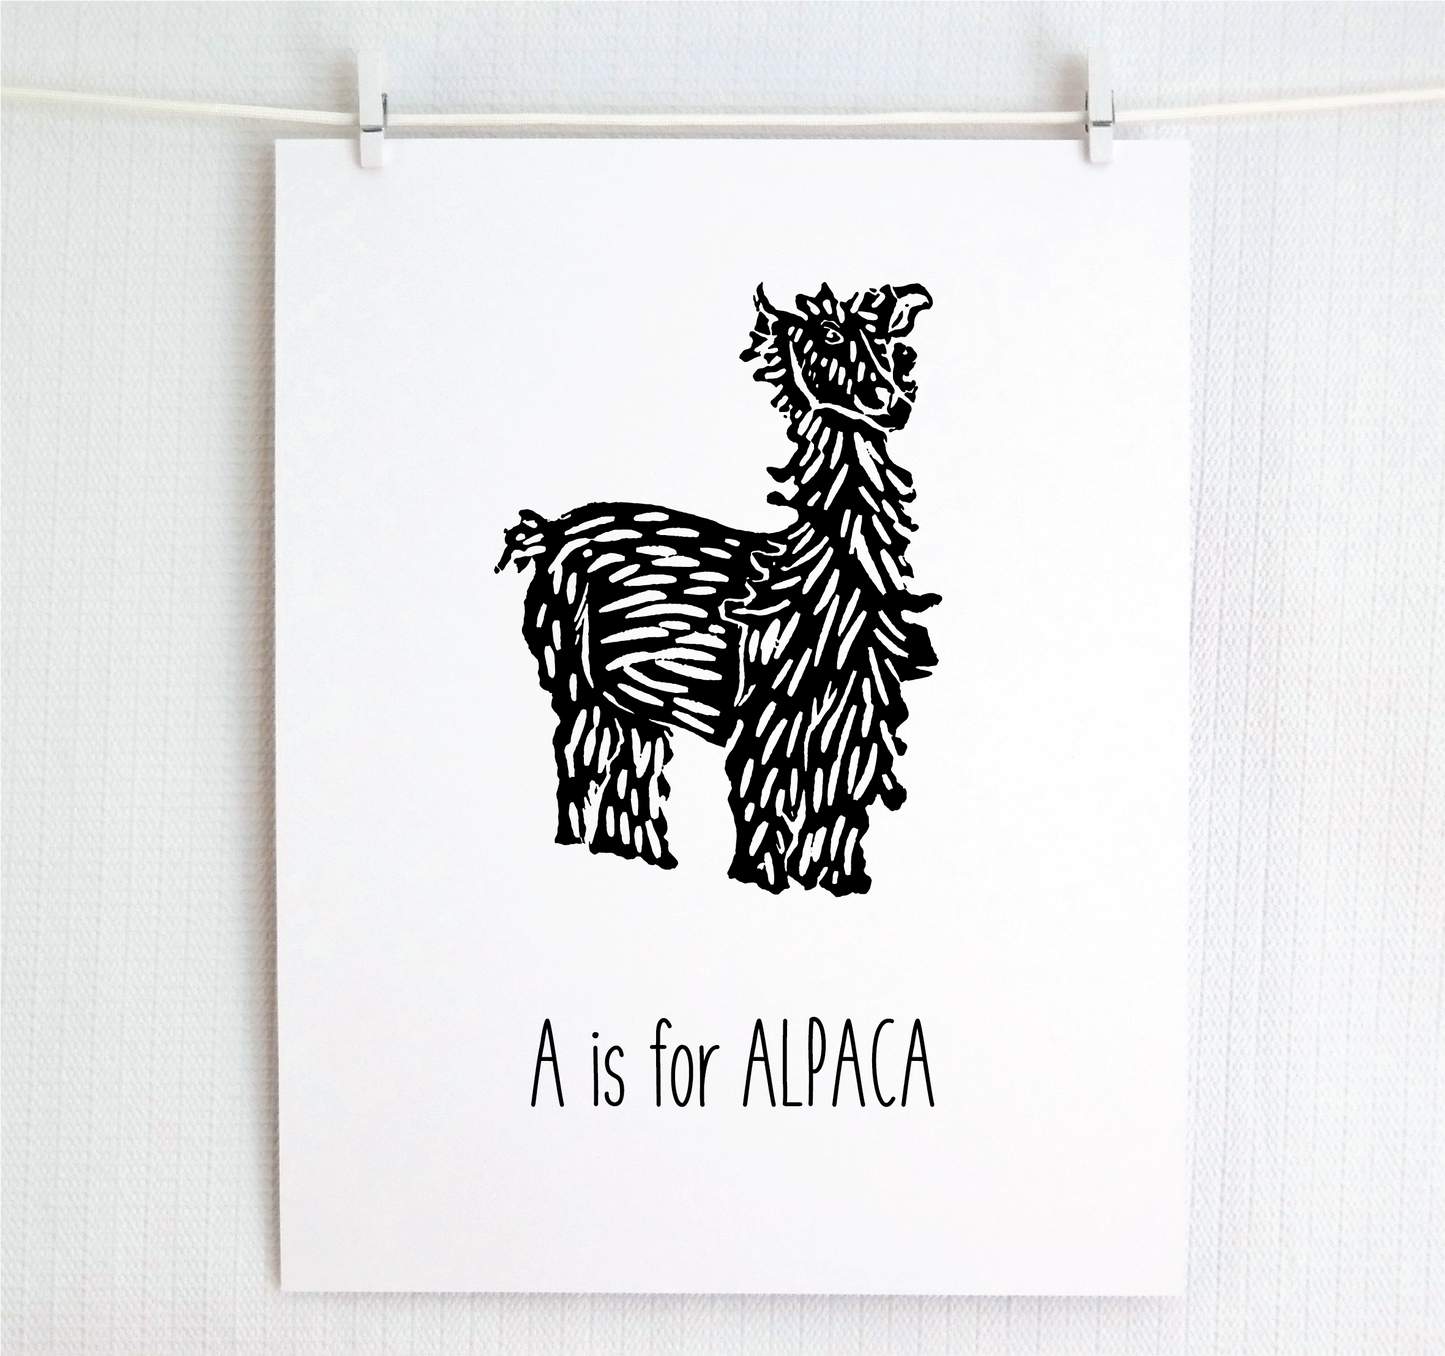 A is for Alpaca